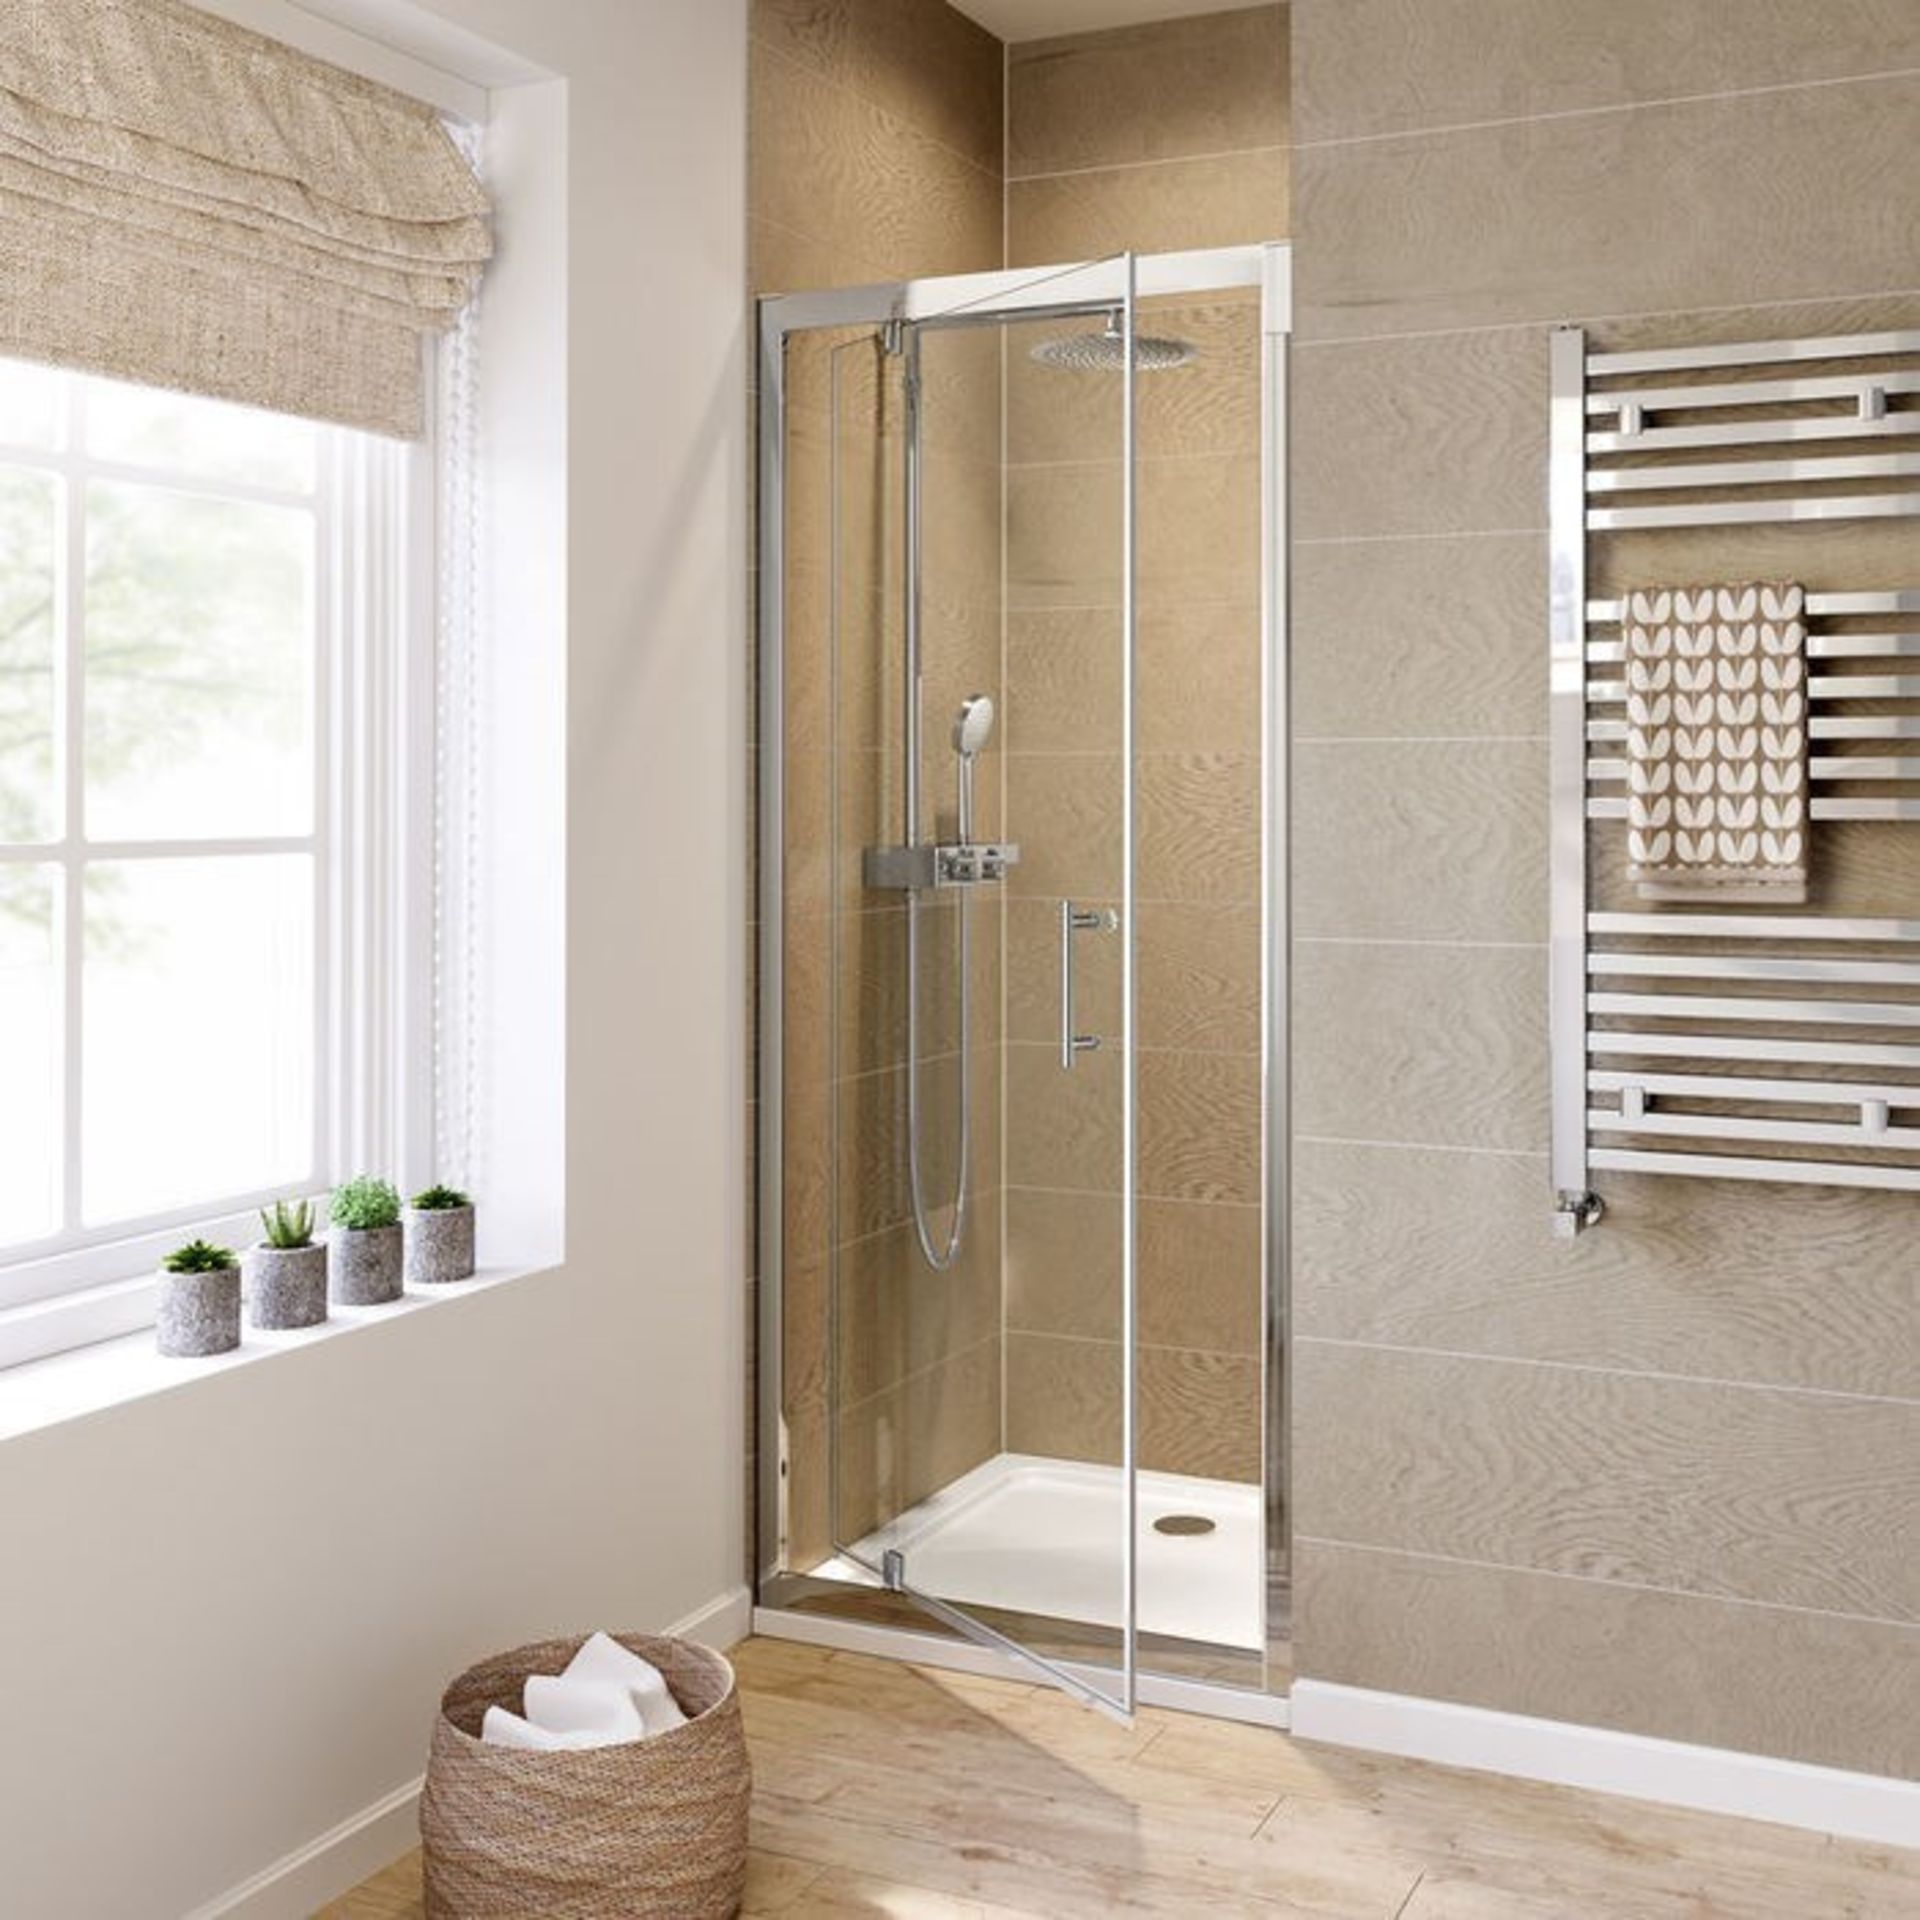 Brand New Twyfords 700mm - 6mm - Premium Pivot Shower Door. RRP £339.99.8mm Safety Glass Fully water - Image 3 of 3